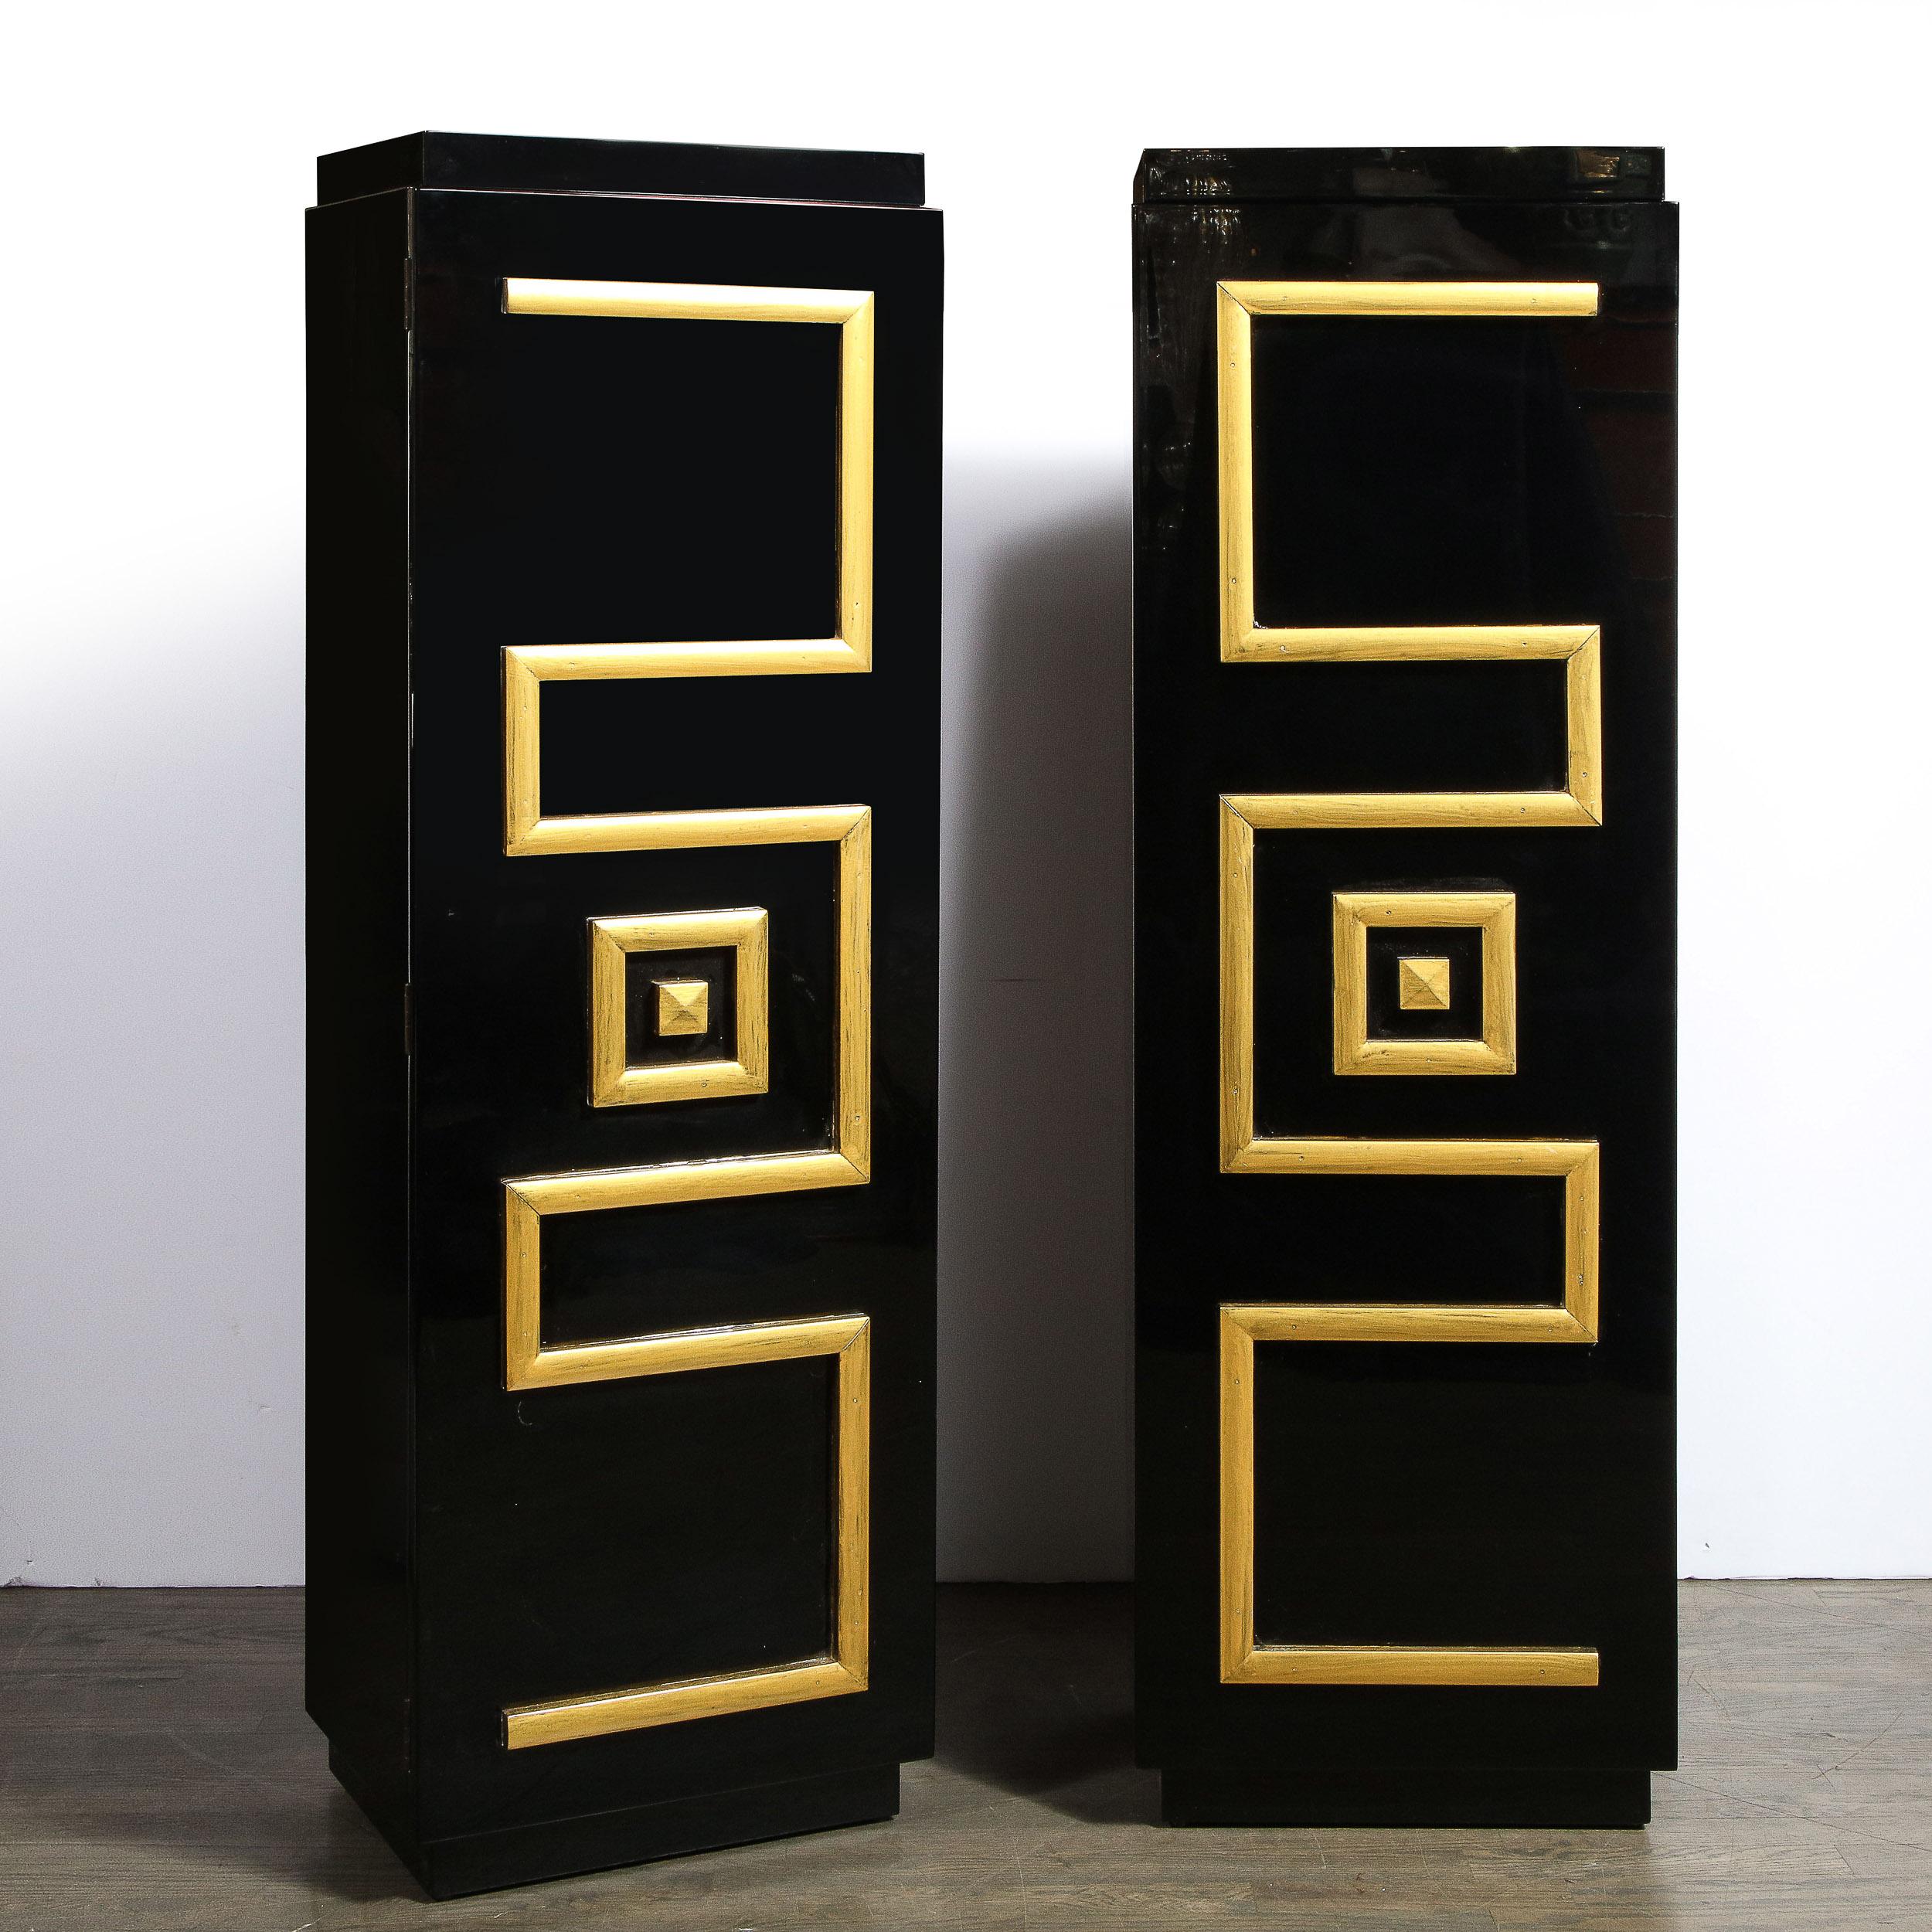 This stunning pair of custom pedestal cabinets were realized by the legendary 20th century designer James Mont in the United States circa 1950. They feature volumetric rectangular bodies in lustrous black lacquer with a stylized greek key form in